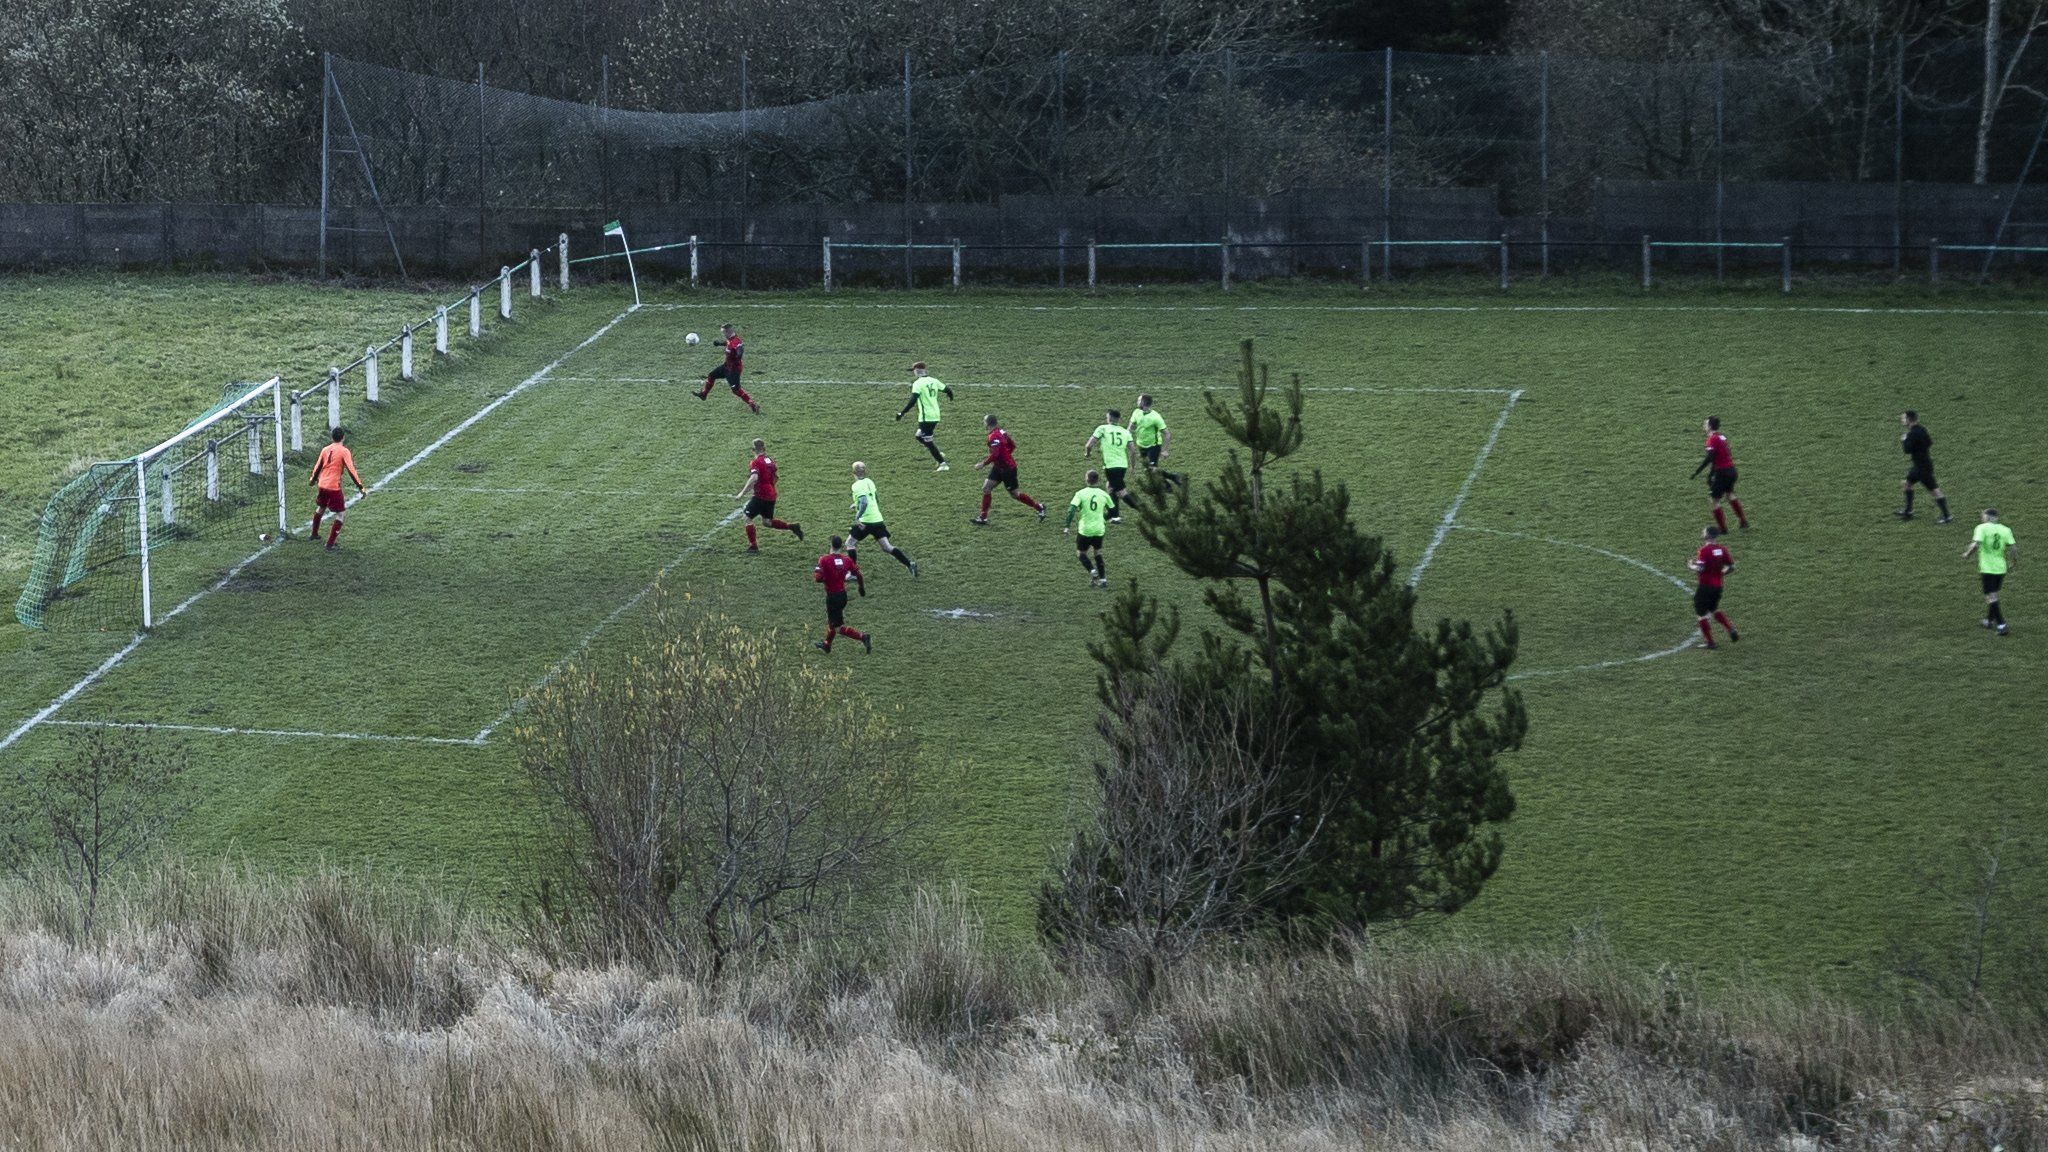 Action from a grassroots football match in Wales